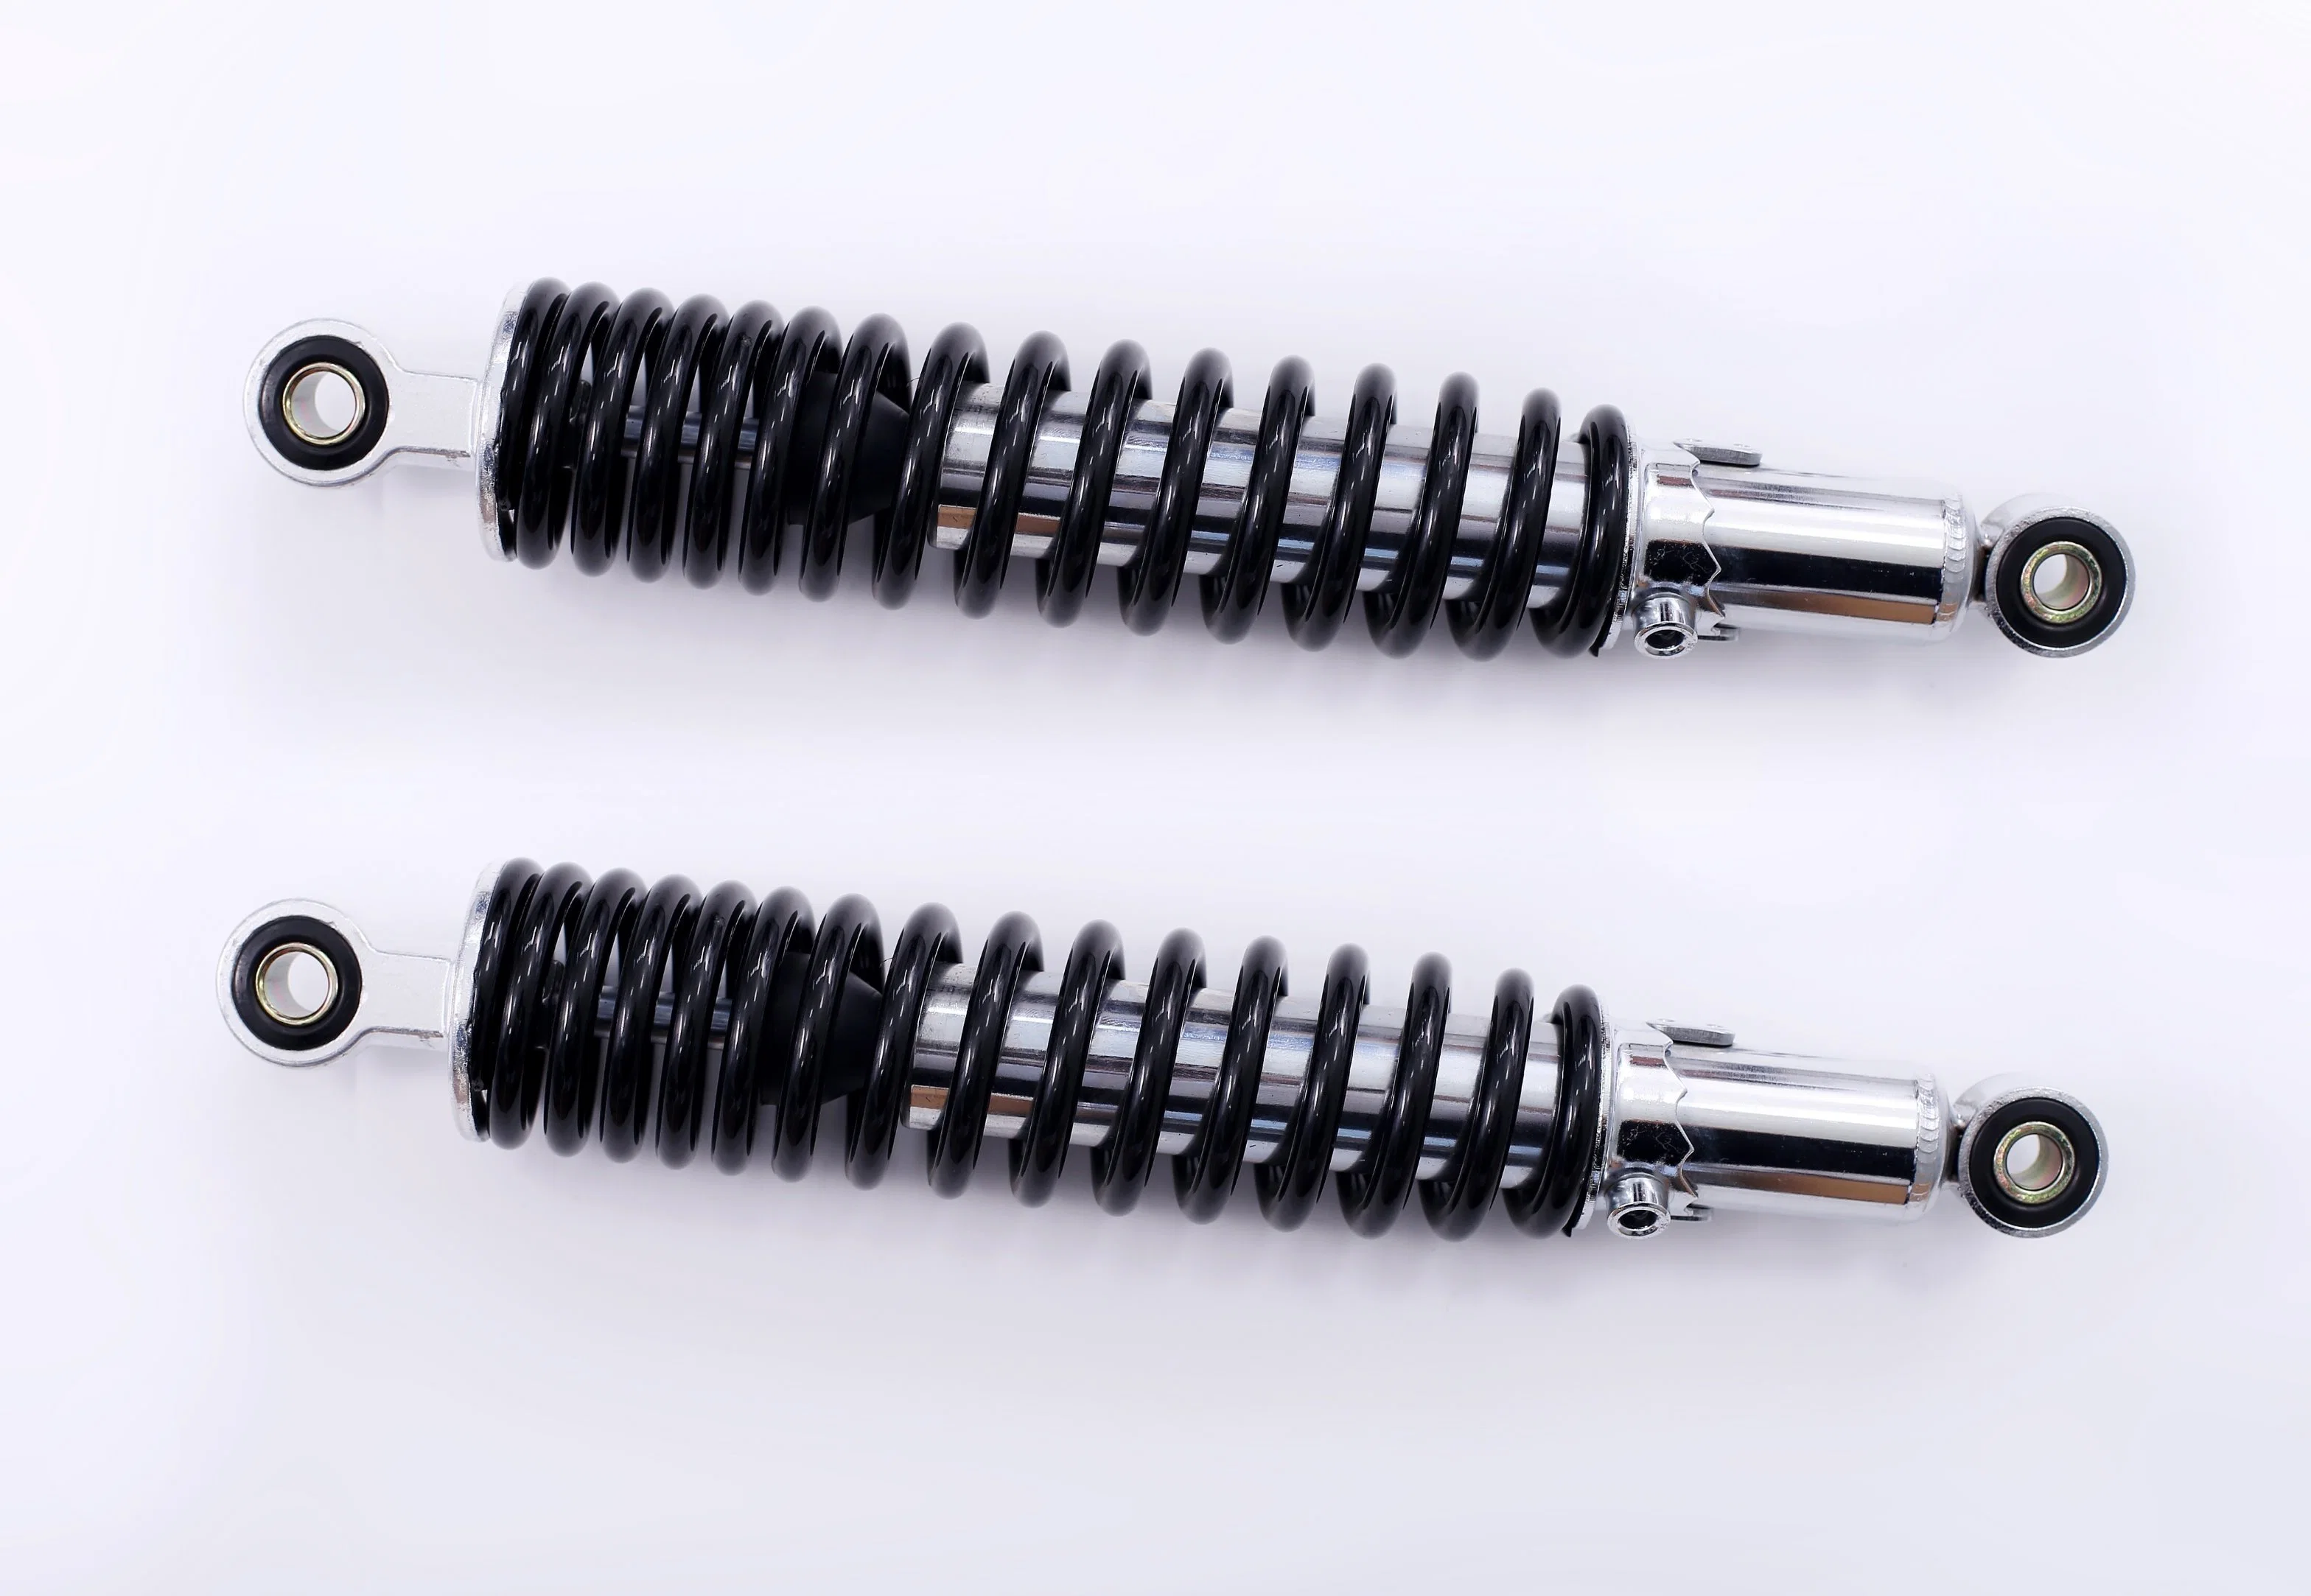 310mm Rear Suspension Motorcycle Parts Shock Absorber for Motorcycles E-Bike